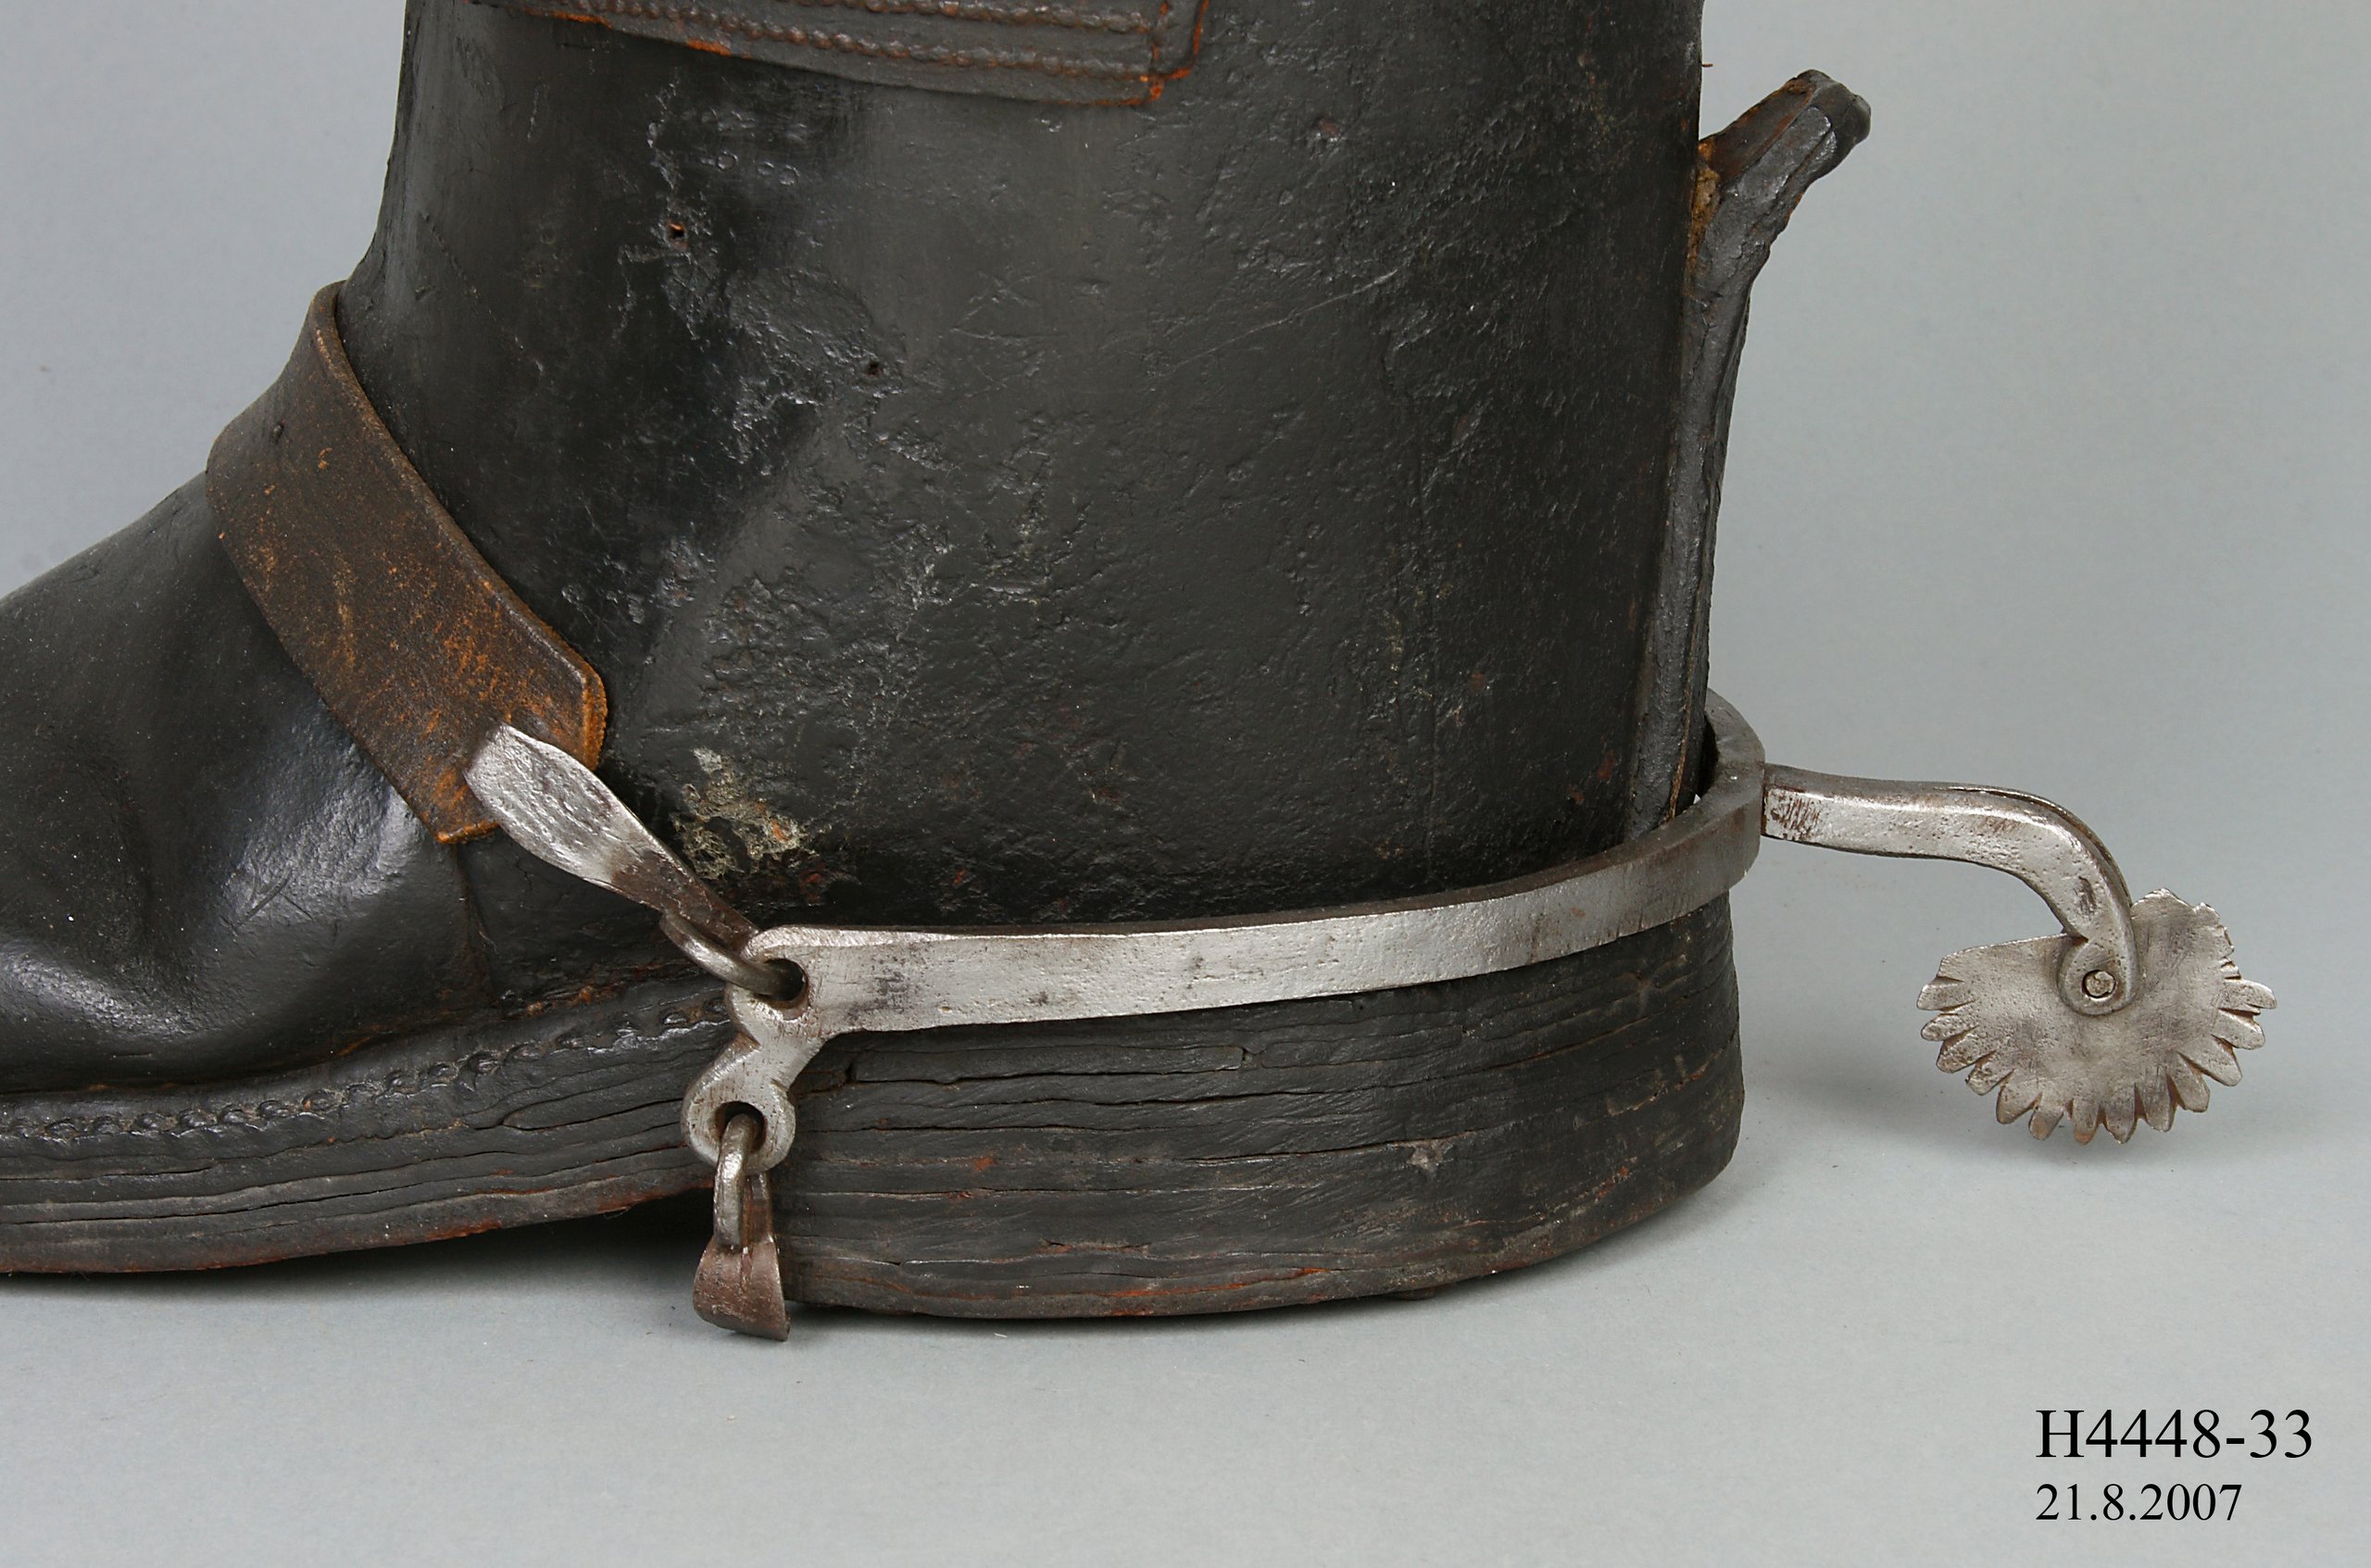 Postillion boot with spur from the Joseph Box collection